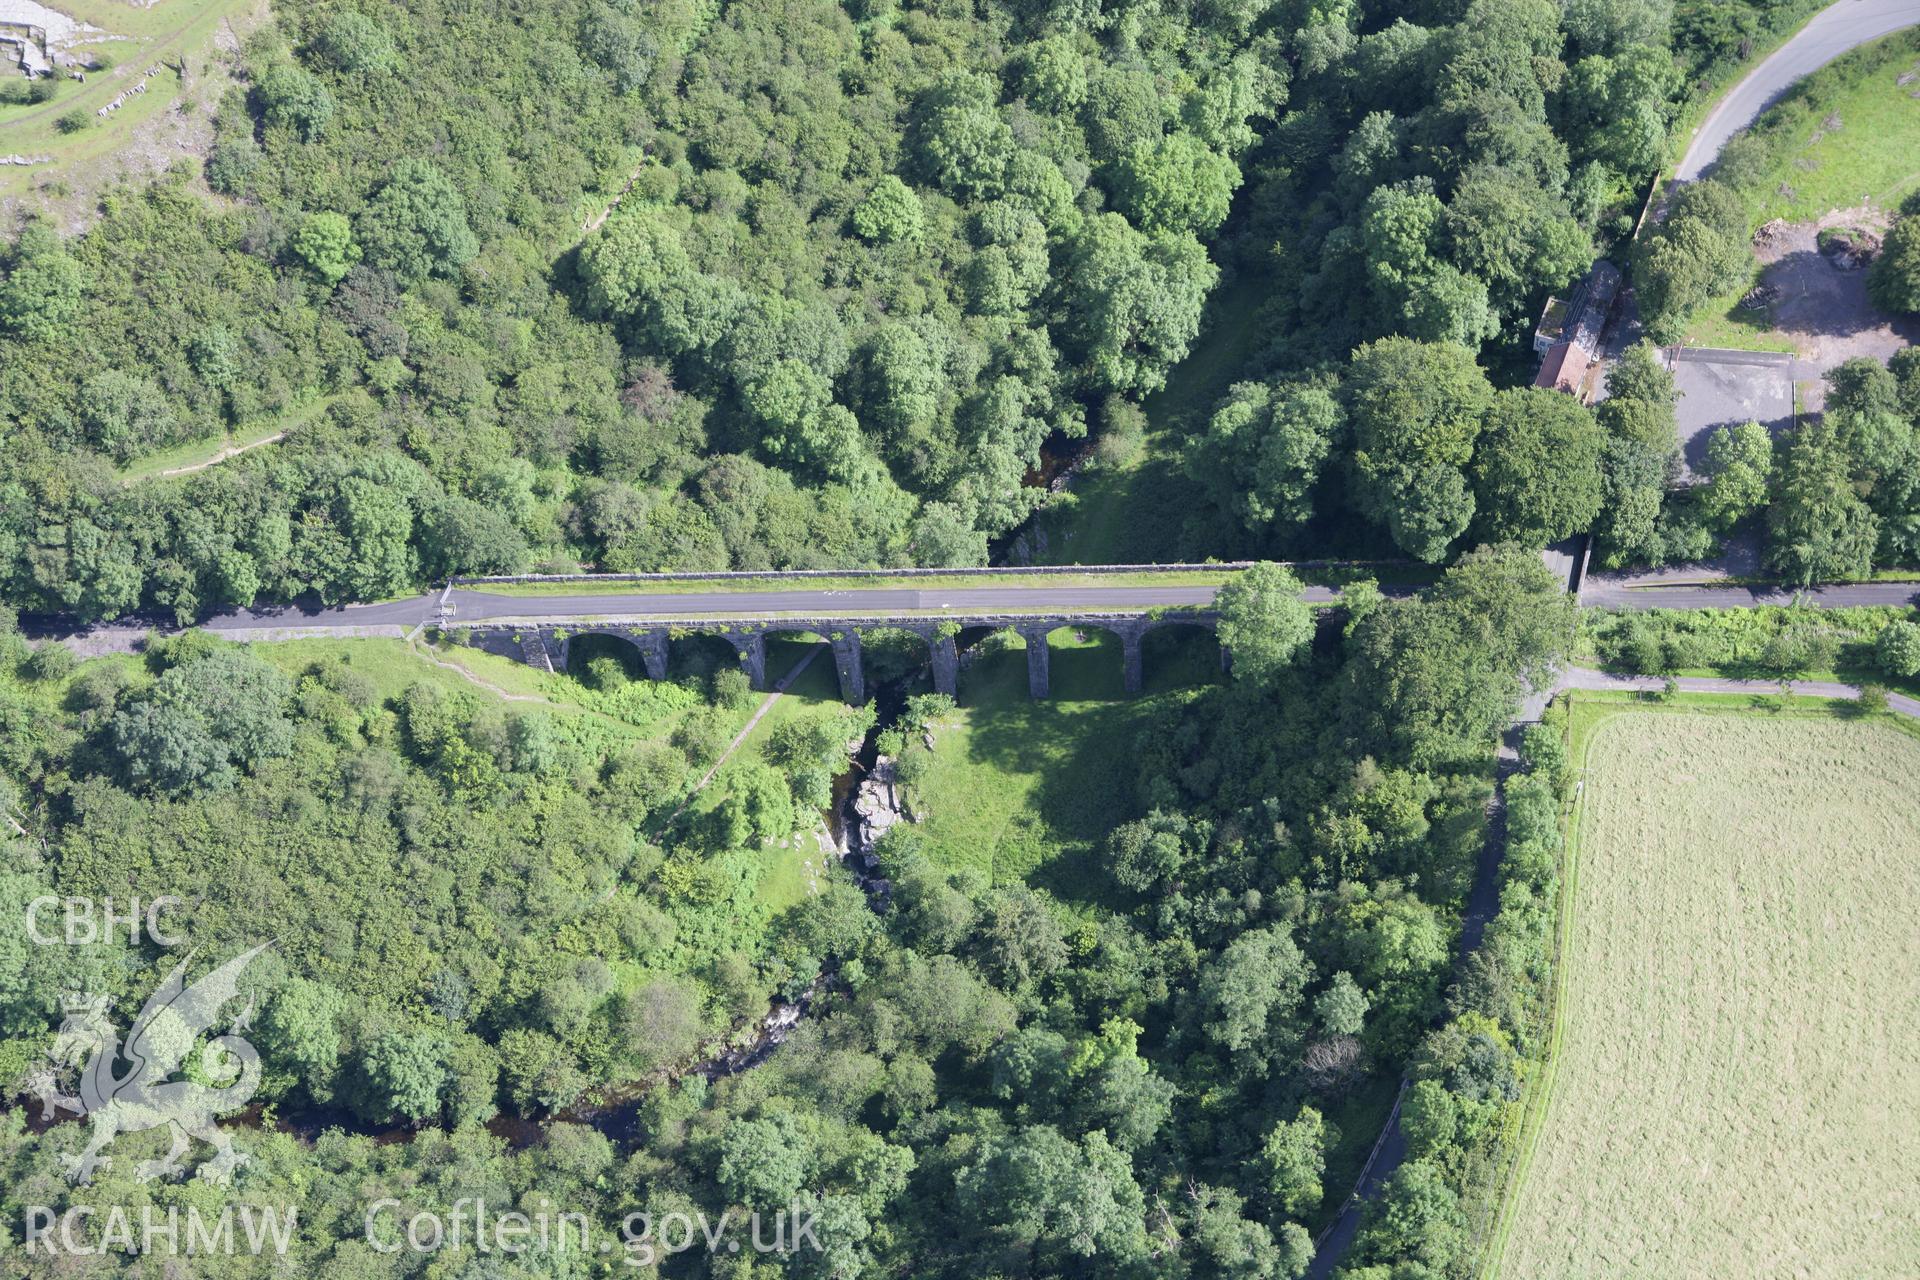 RCAHMW colour oblique aerial photograph of Pontsarn Railway Viaduct, Merthyr Tydfil. Taken on 30 July 2007 by Toby Driver